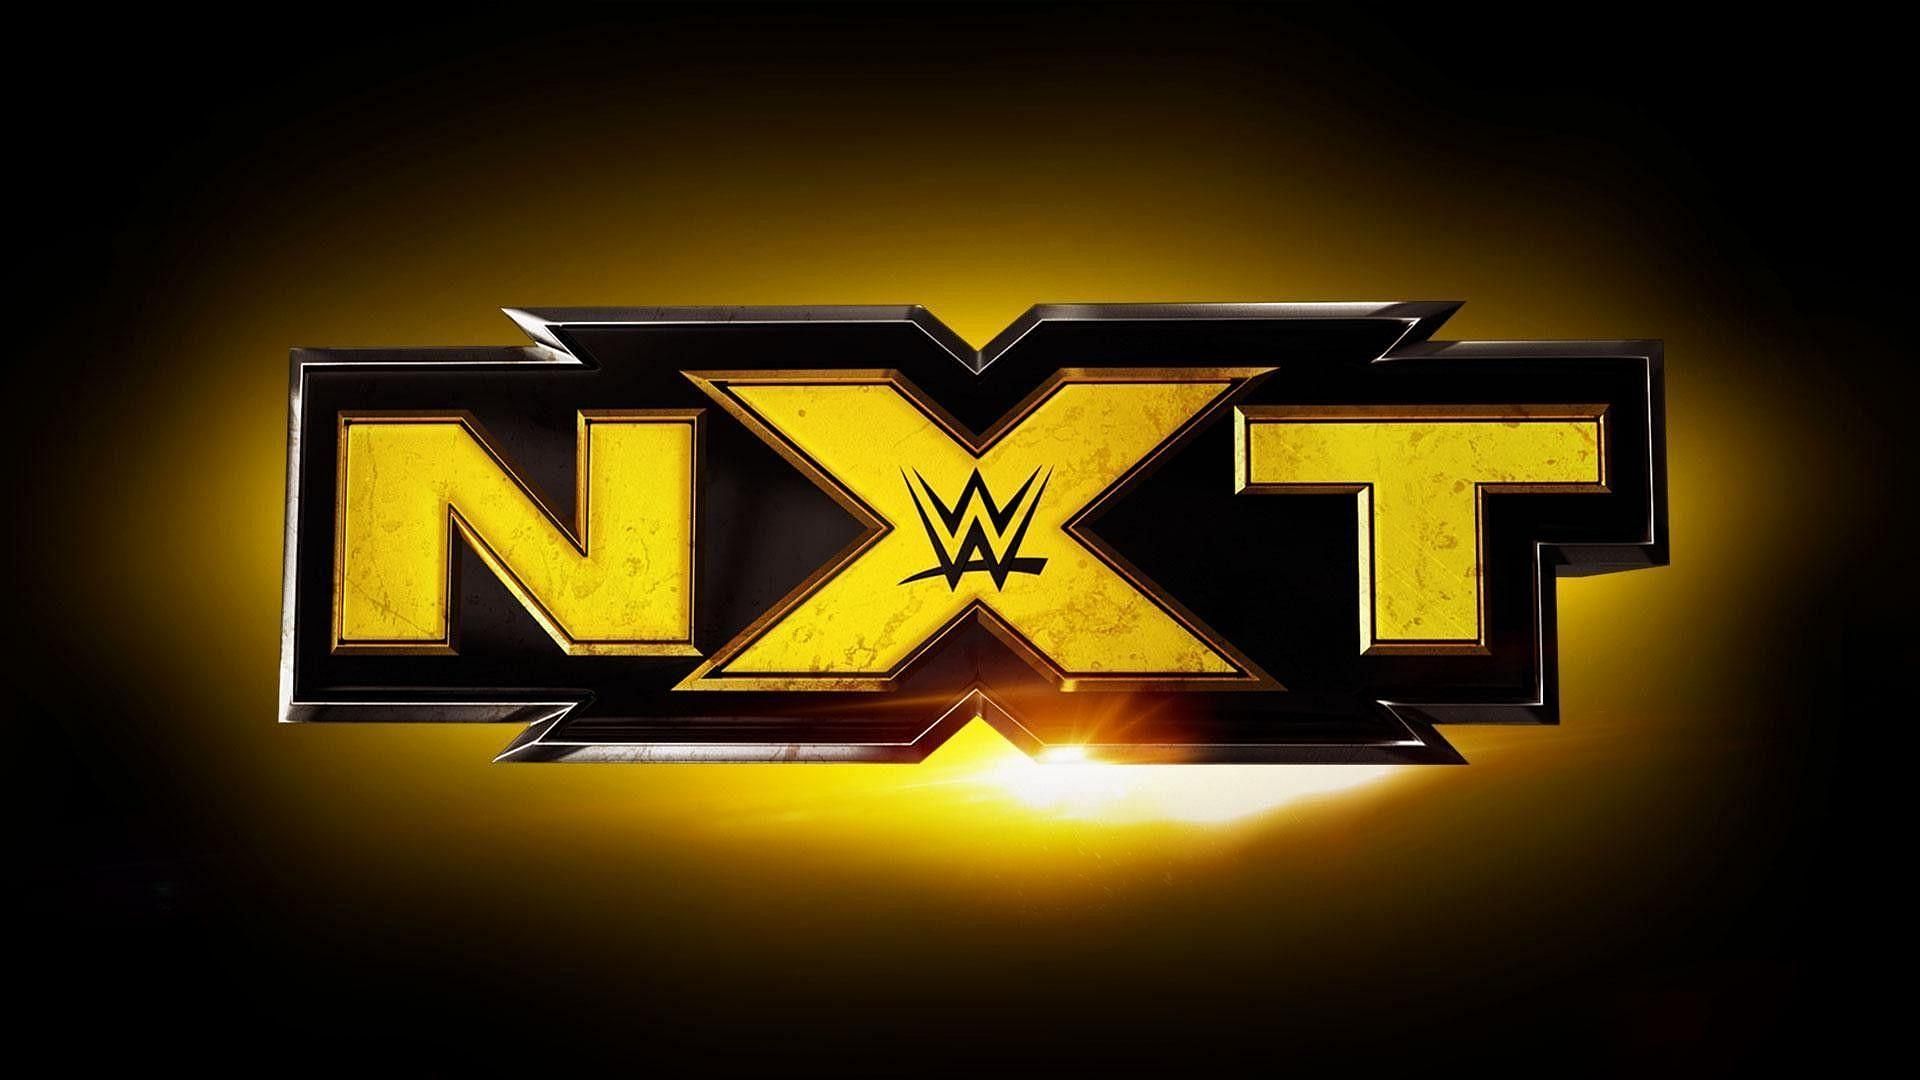 Wwe Patents Four More Nxt Superstar Names In Latest Move